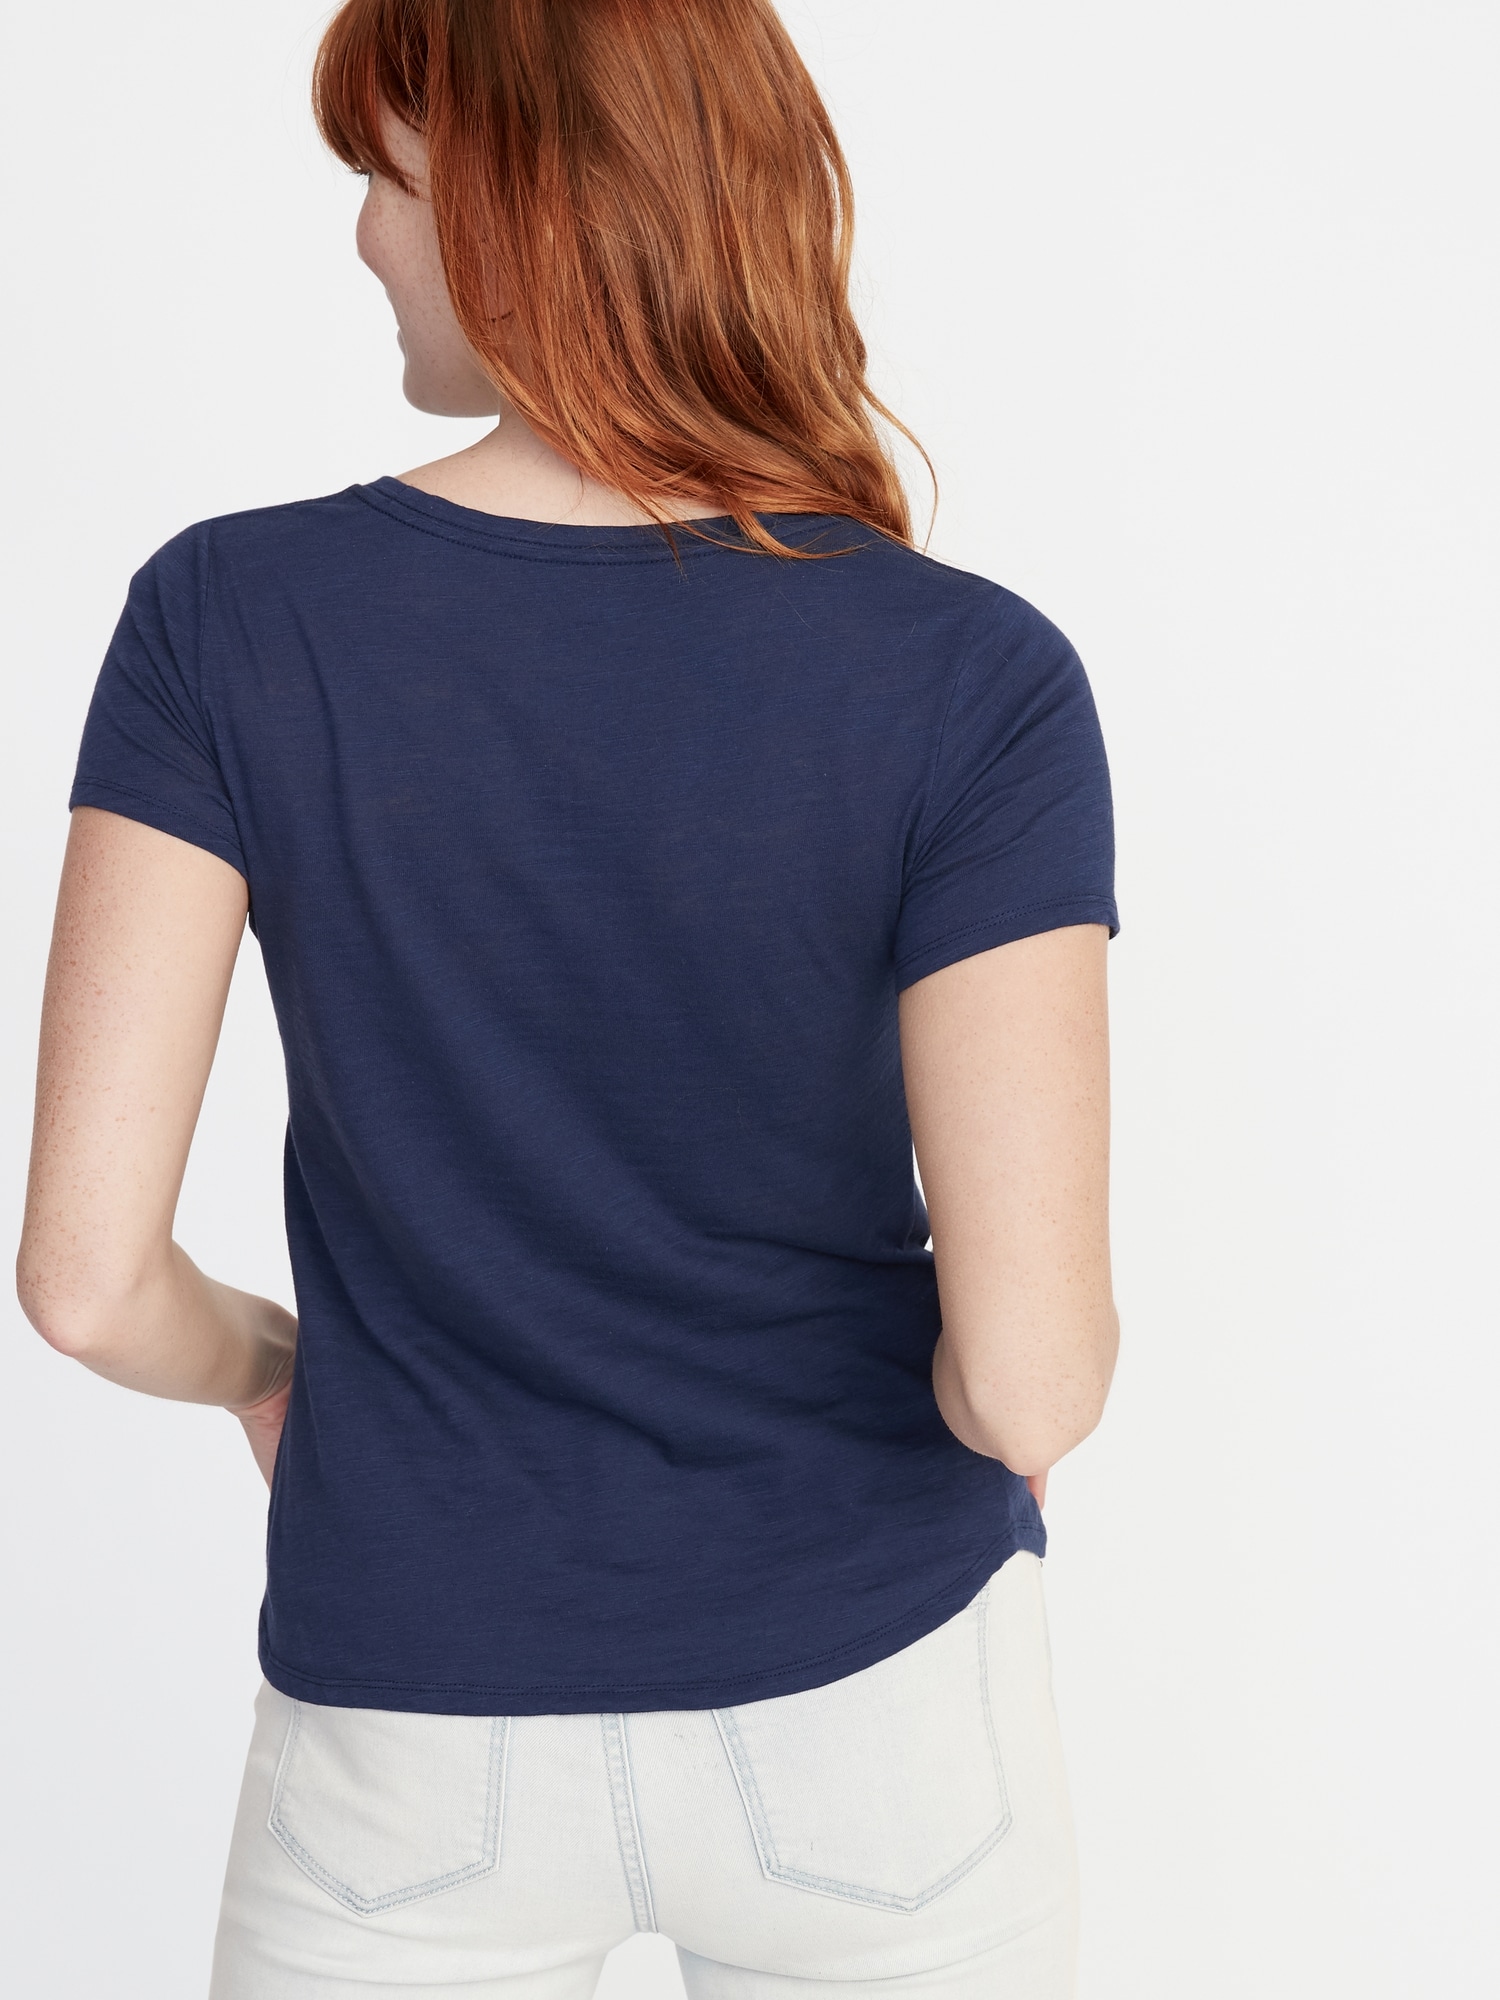 Relaxed Graphic Slub-Knit Tee for Women | Old Navy